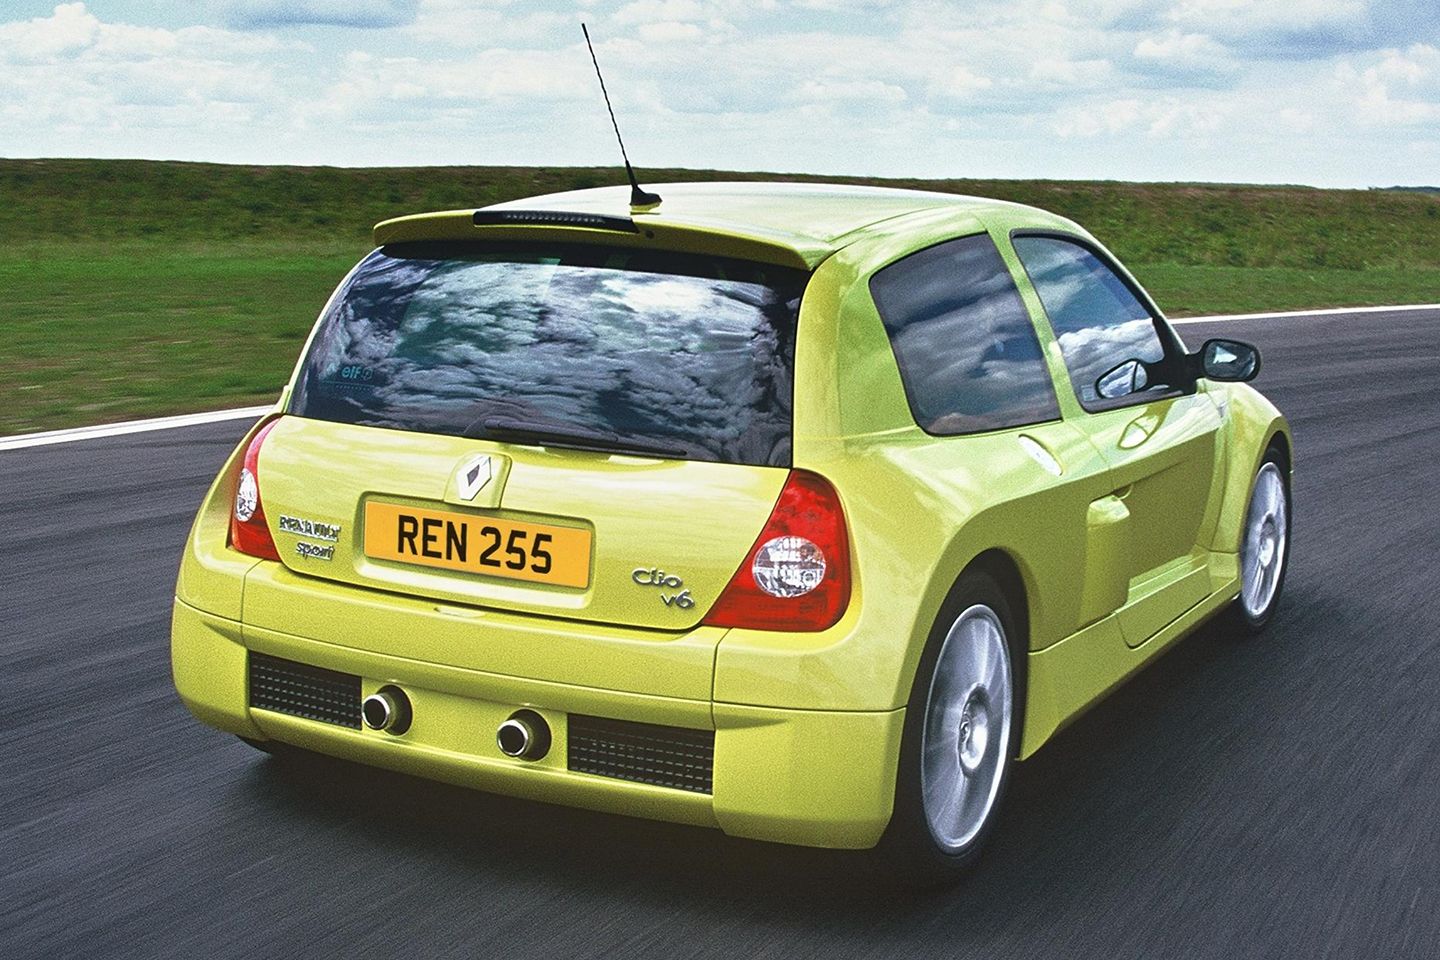 How to buy a Renault Clio II Phase 2 (2001-2005 models)